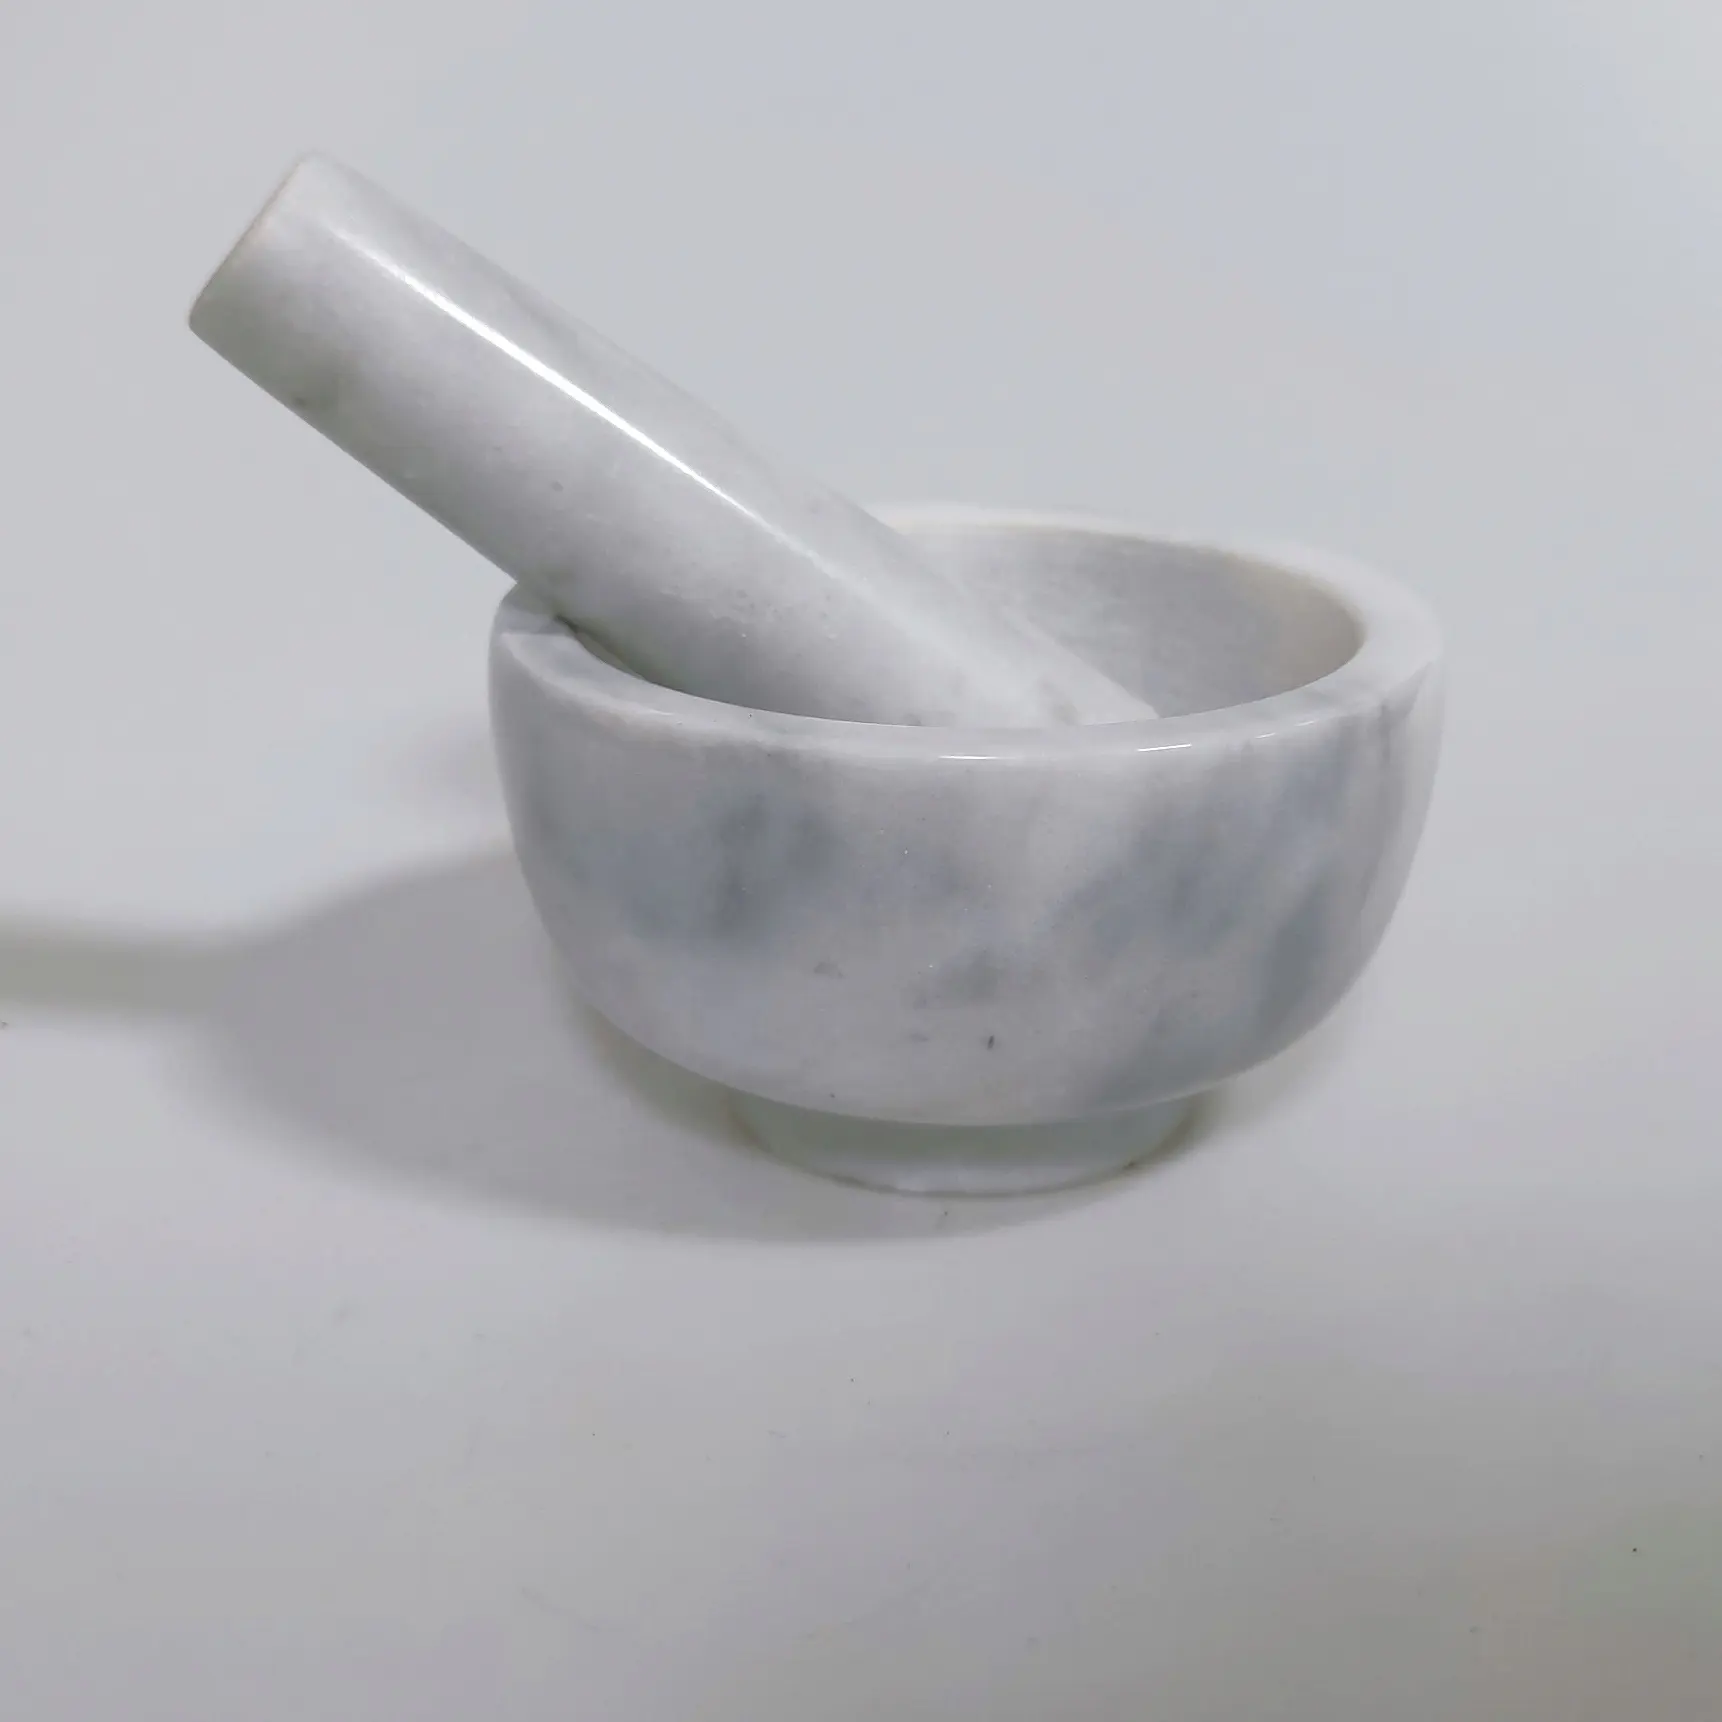 Hot Selling Custom Large Kitchen Natural Stone Marble Mortar Pestle round Shape Box Packed for Grinding Herbs Salt Seasoning